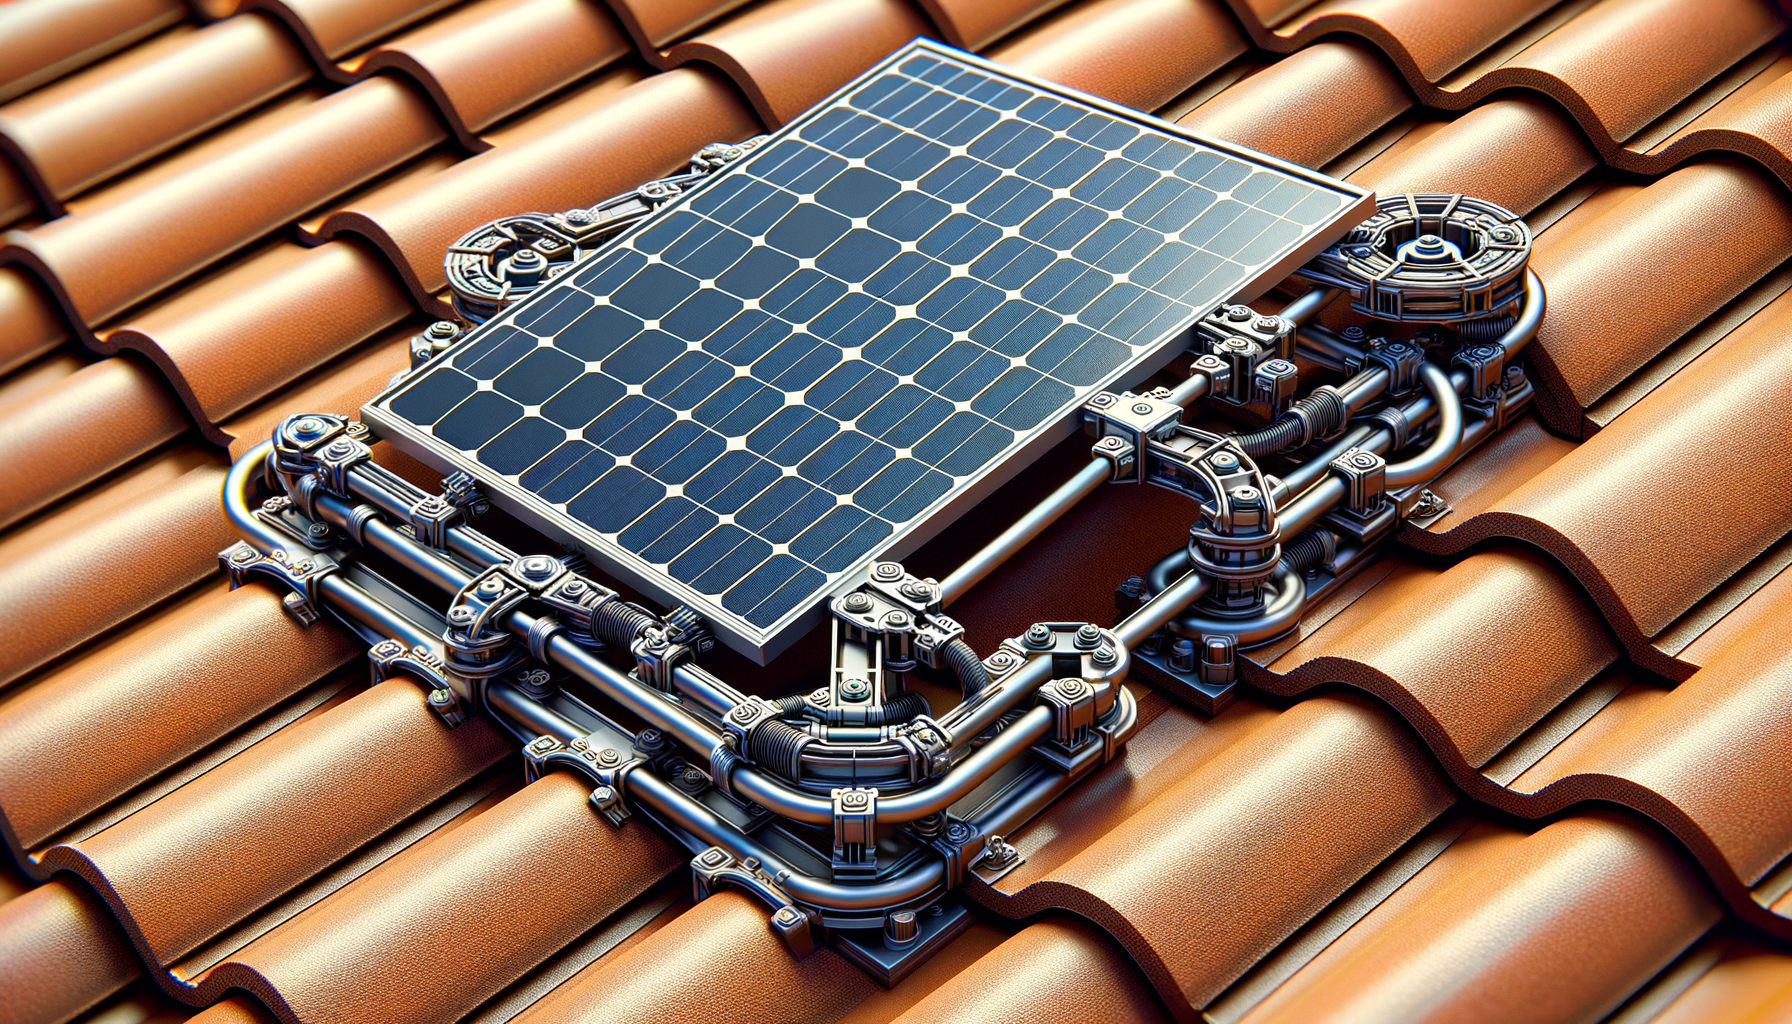 ALT: Secure solar panel mounting system on a clay tile roof